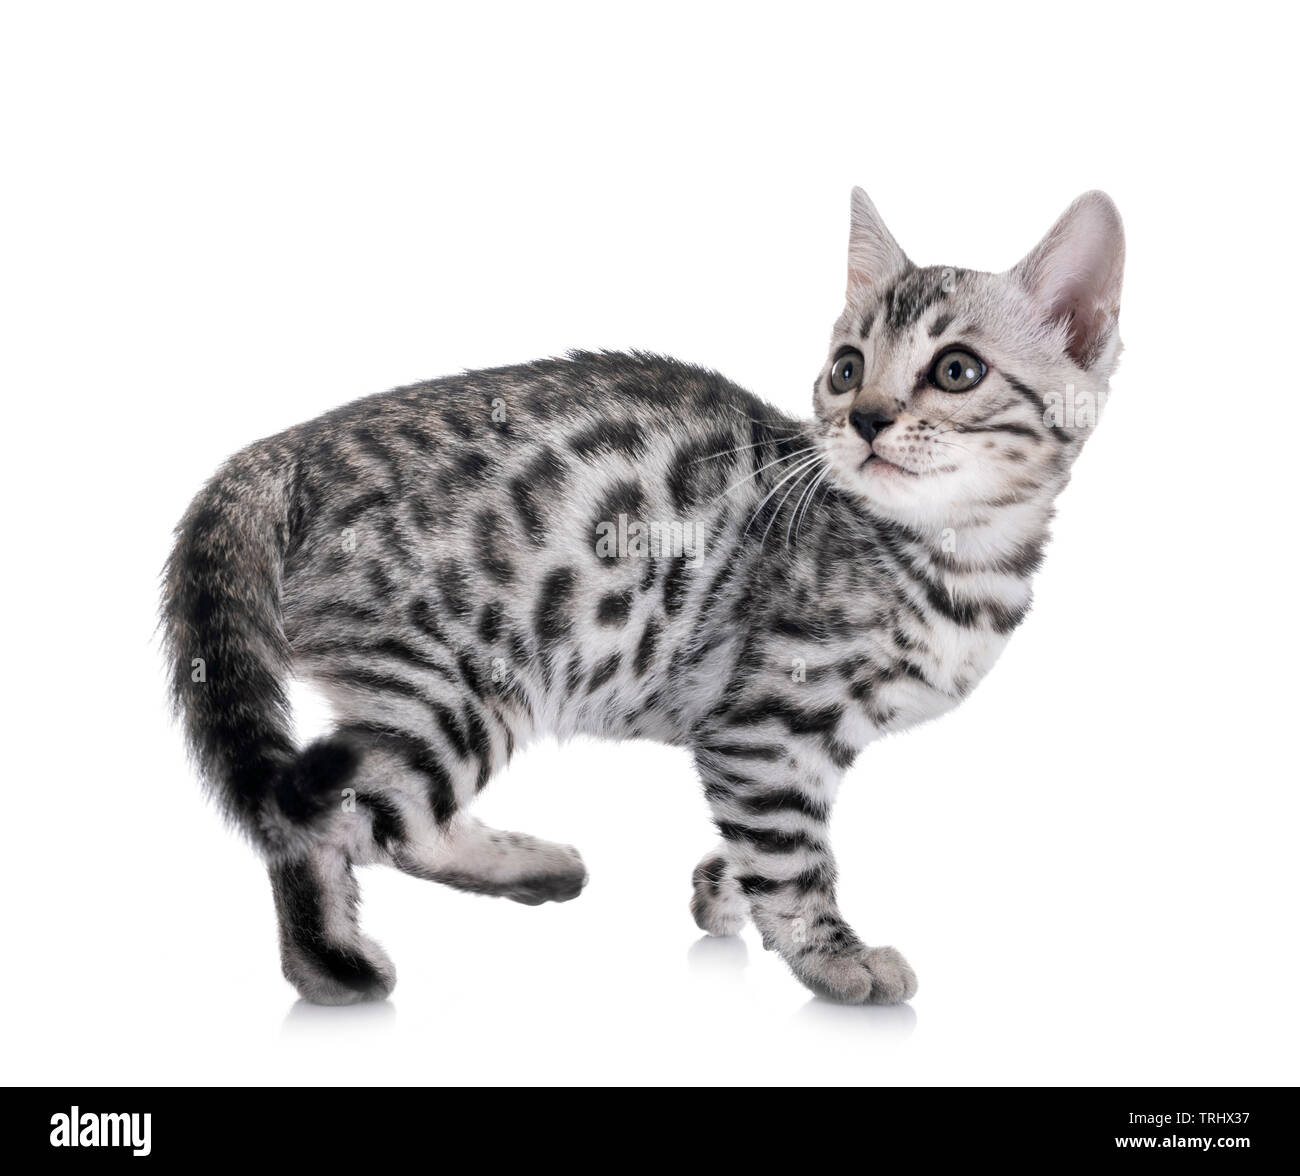 bengal cat in front of white background Stock Photo - Alamy